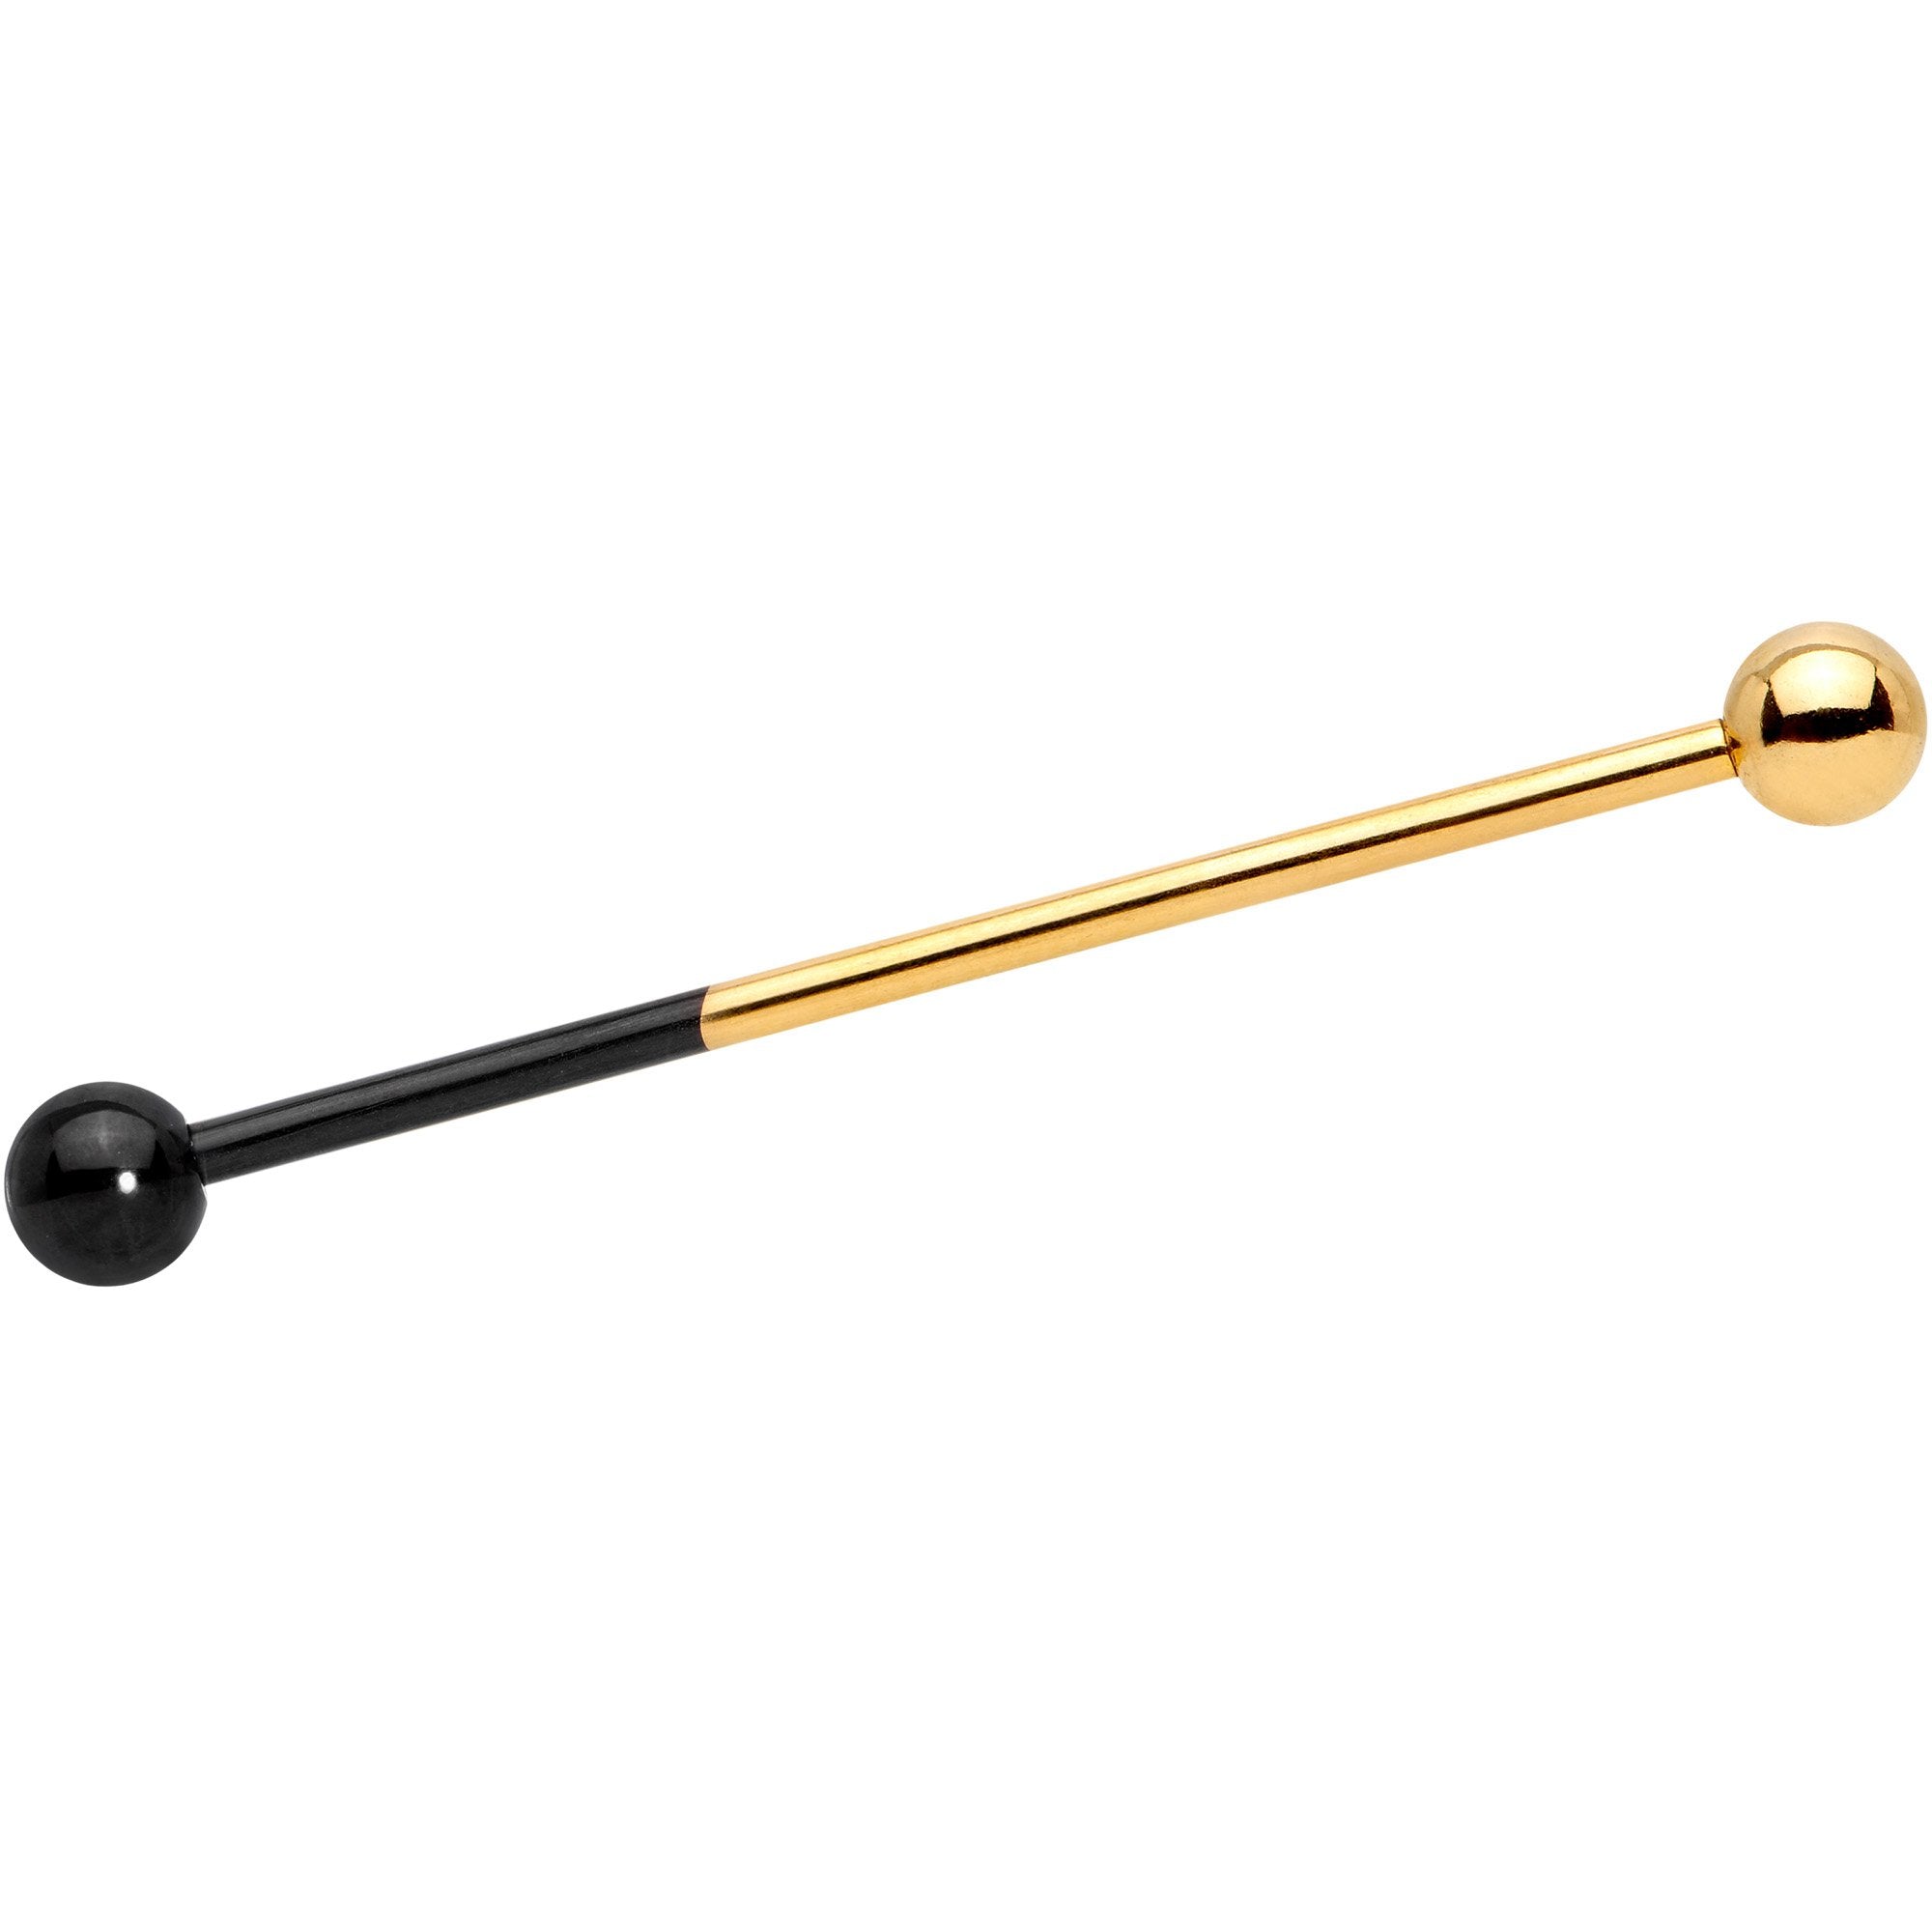 14 Gauge Black and Gold Tone Two Tone Industrial Barbell 38mm